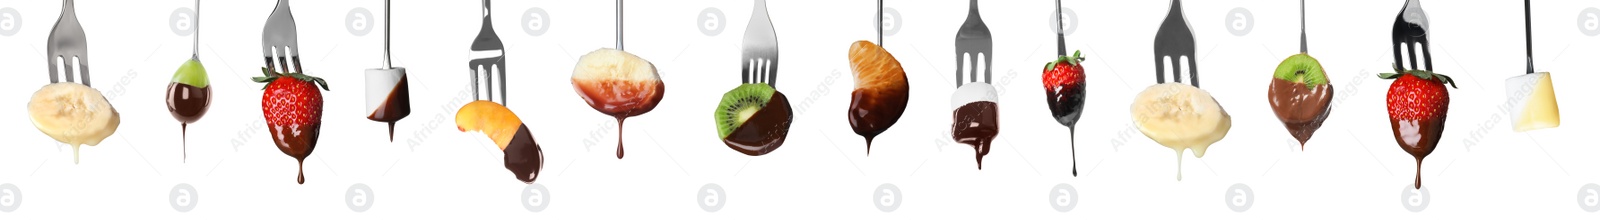 Image of Fondue forks with tasty fruits and marshmallows dipped into chocolate on white background, collage. Banner design